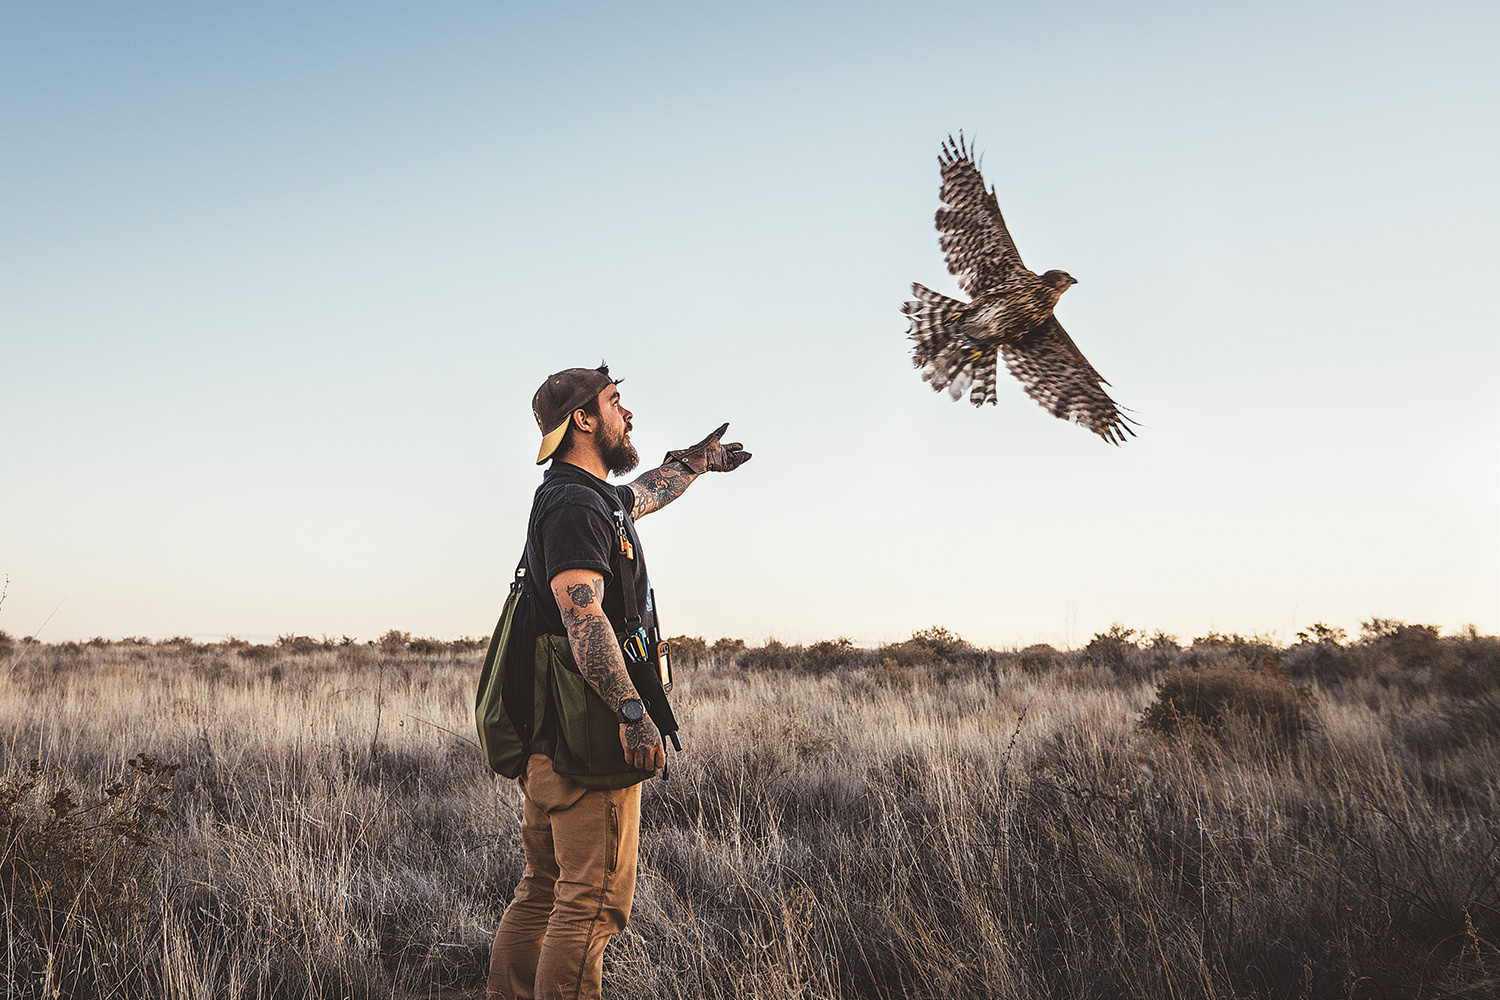 falconer releases goshawk into the air in dry grassland